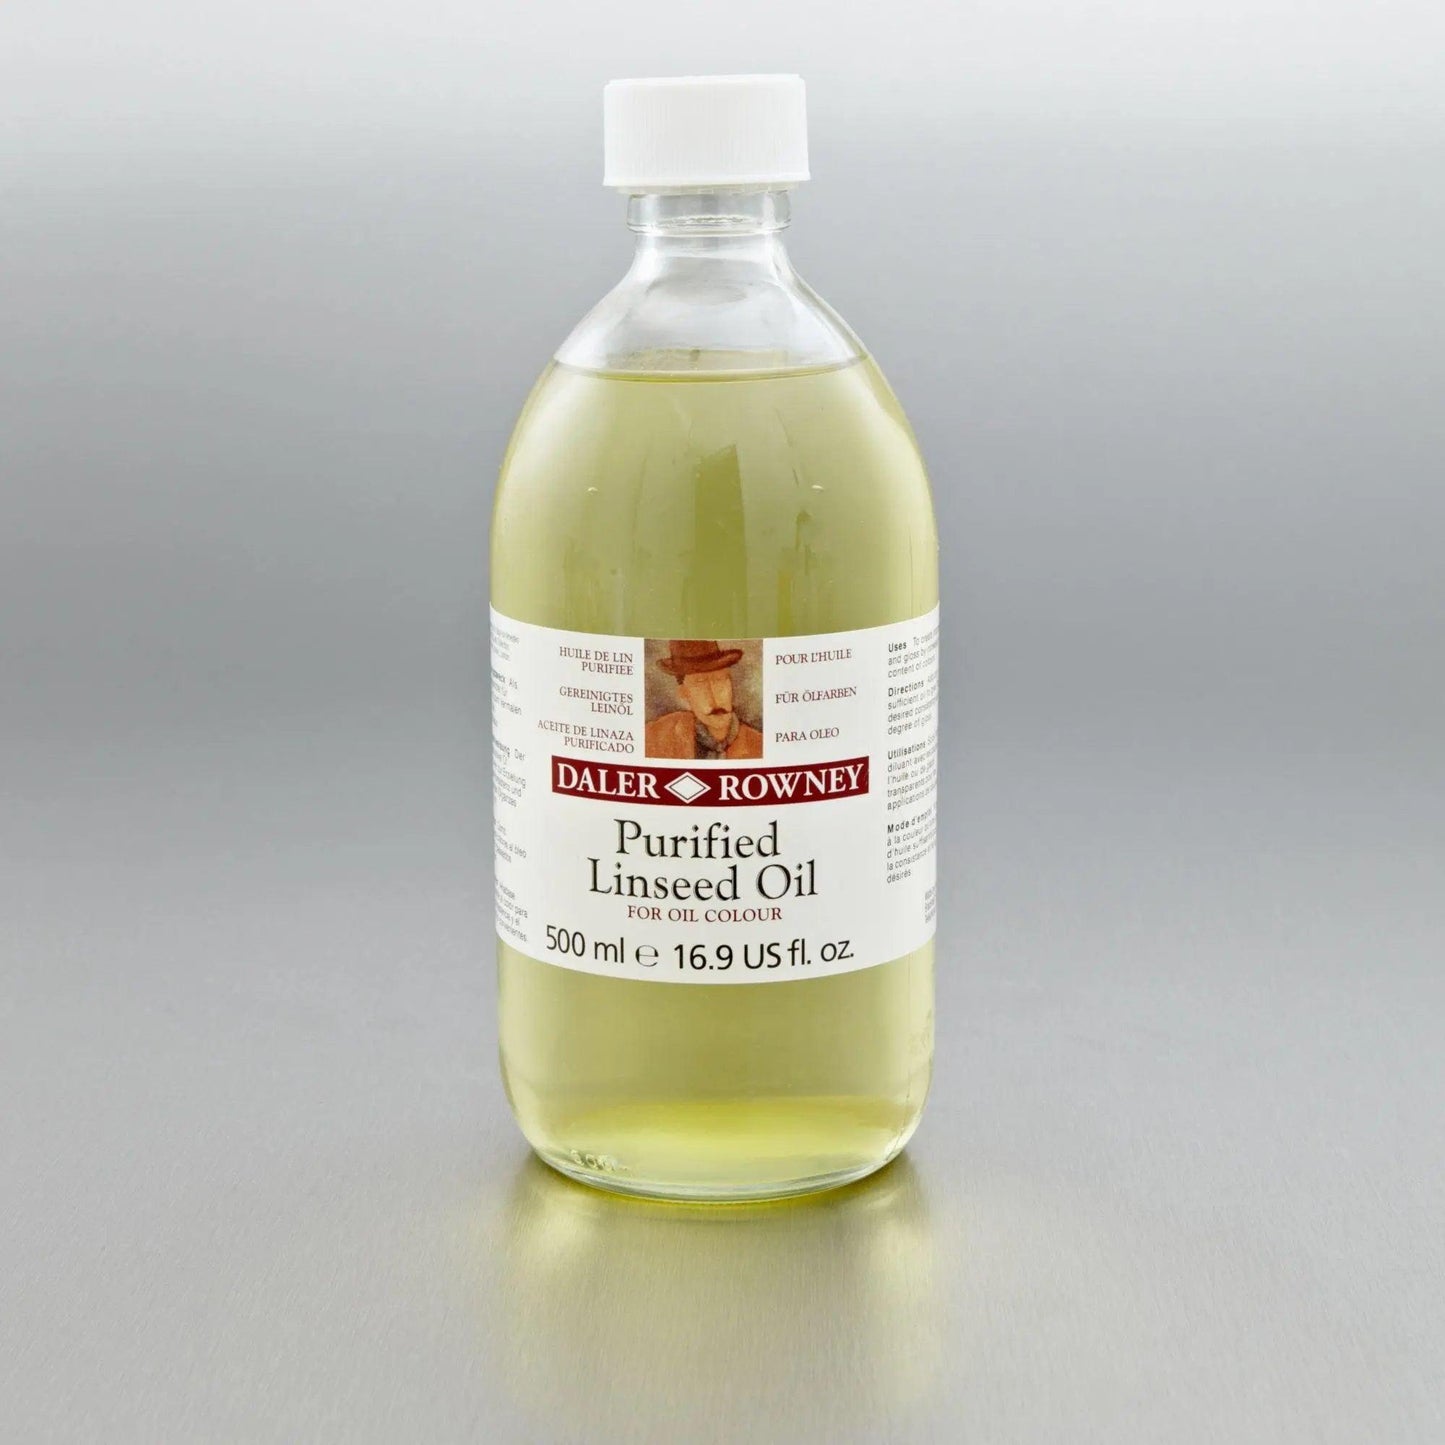 Daler Rowney Purified Linseed Oil 500ml Bottle The Stationers